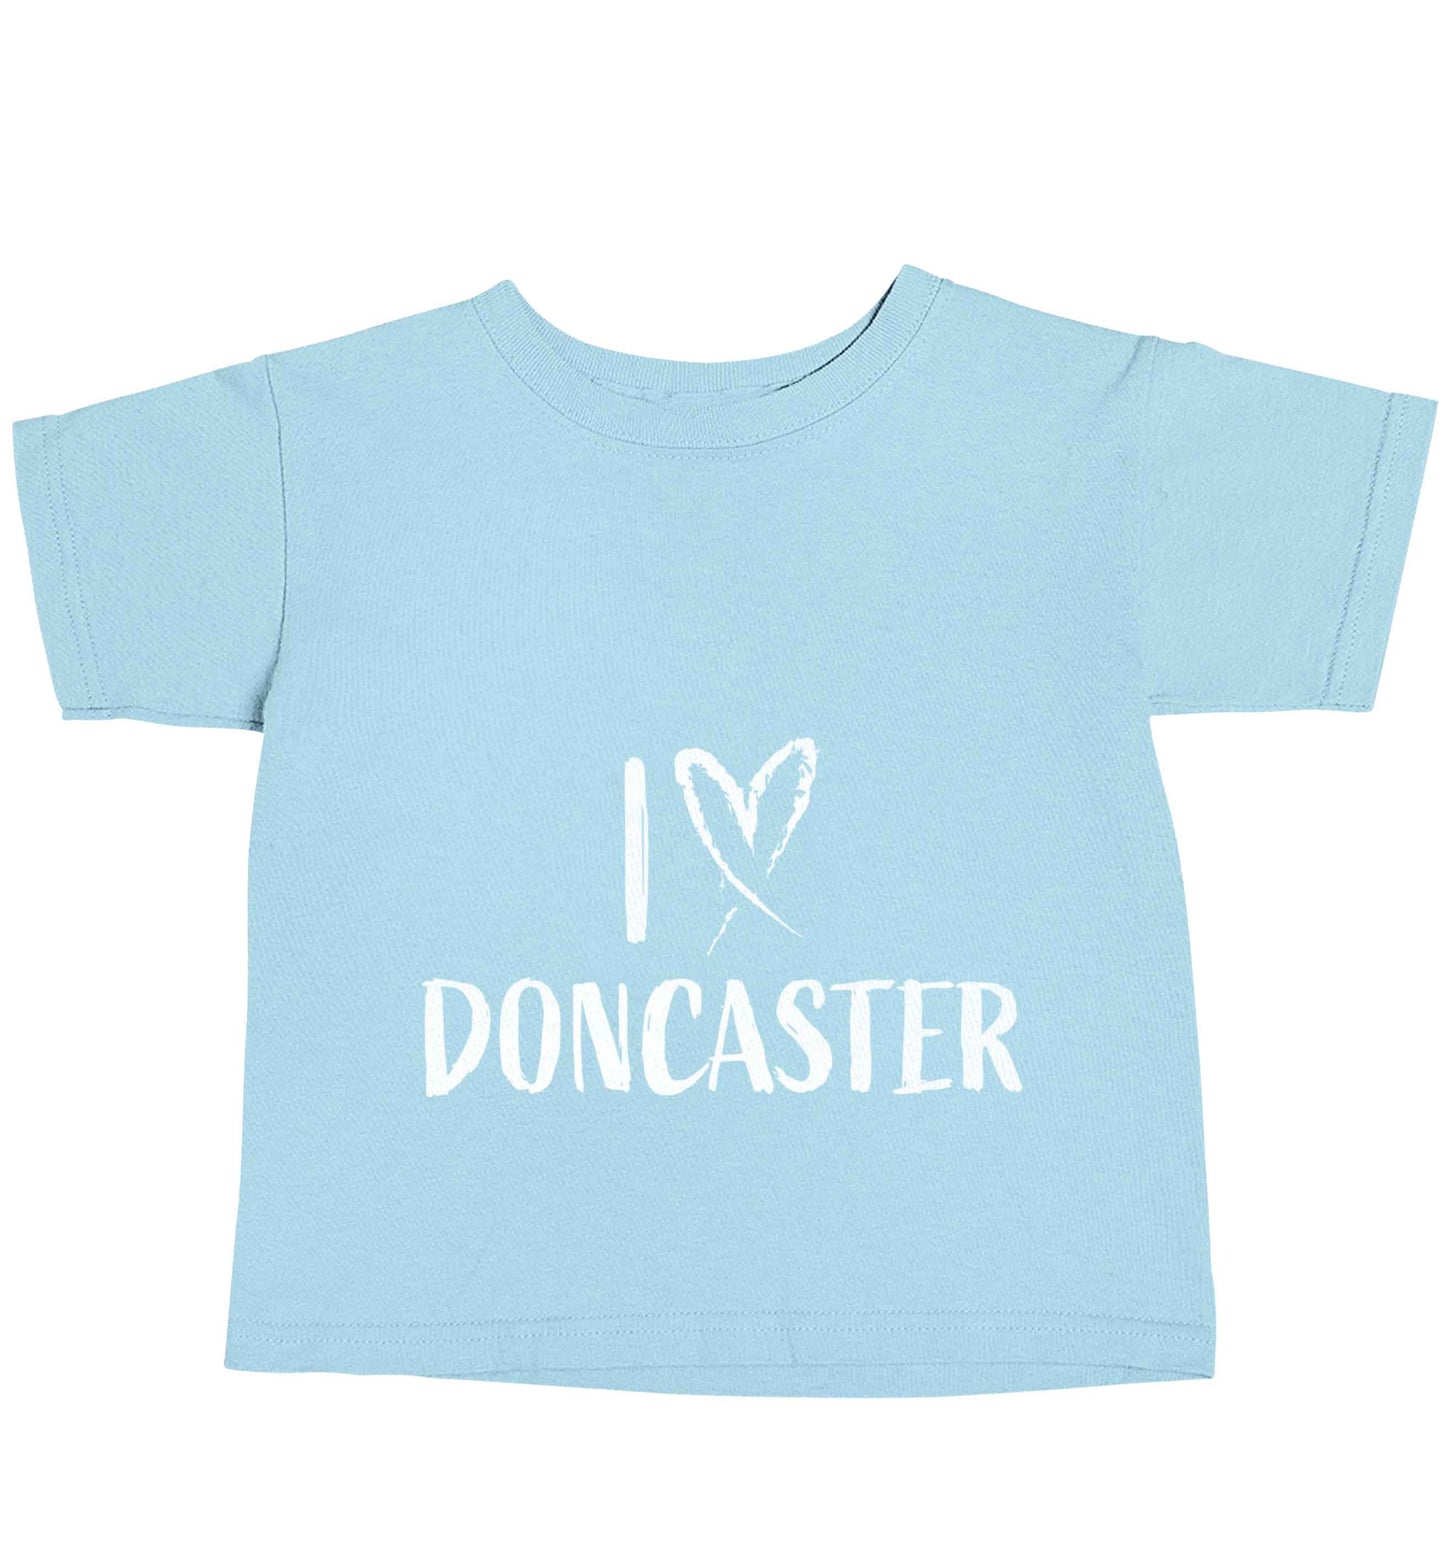 I love Doncaster light blue baby toddler Tshirt 2 Years